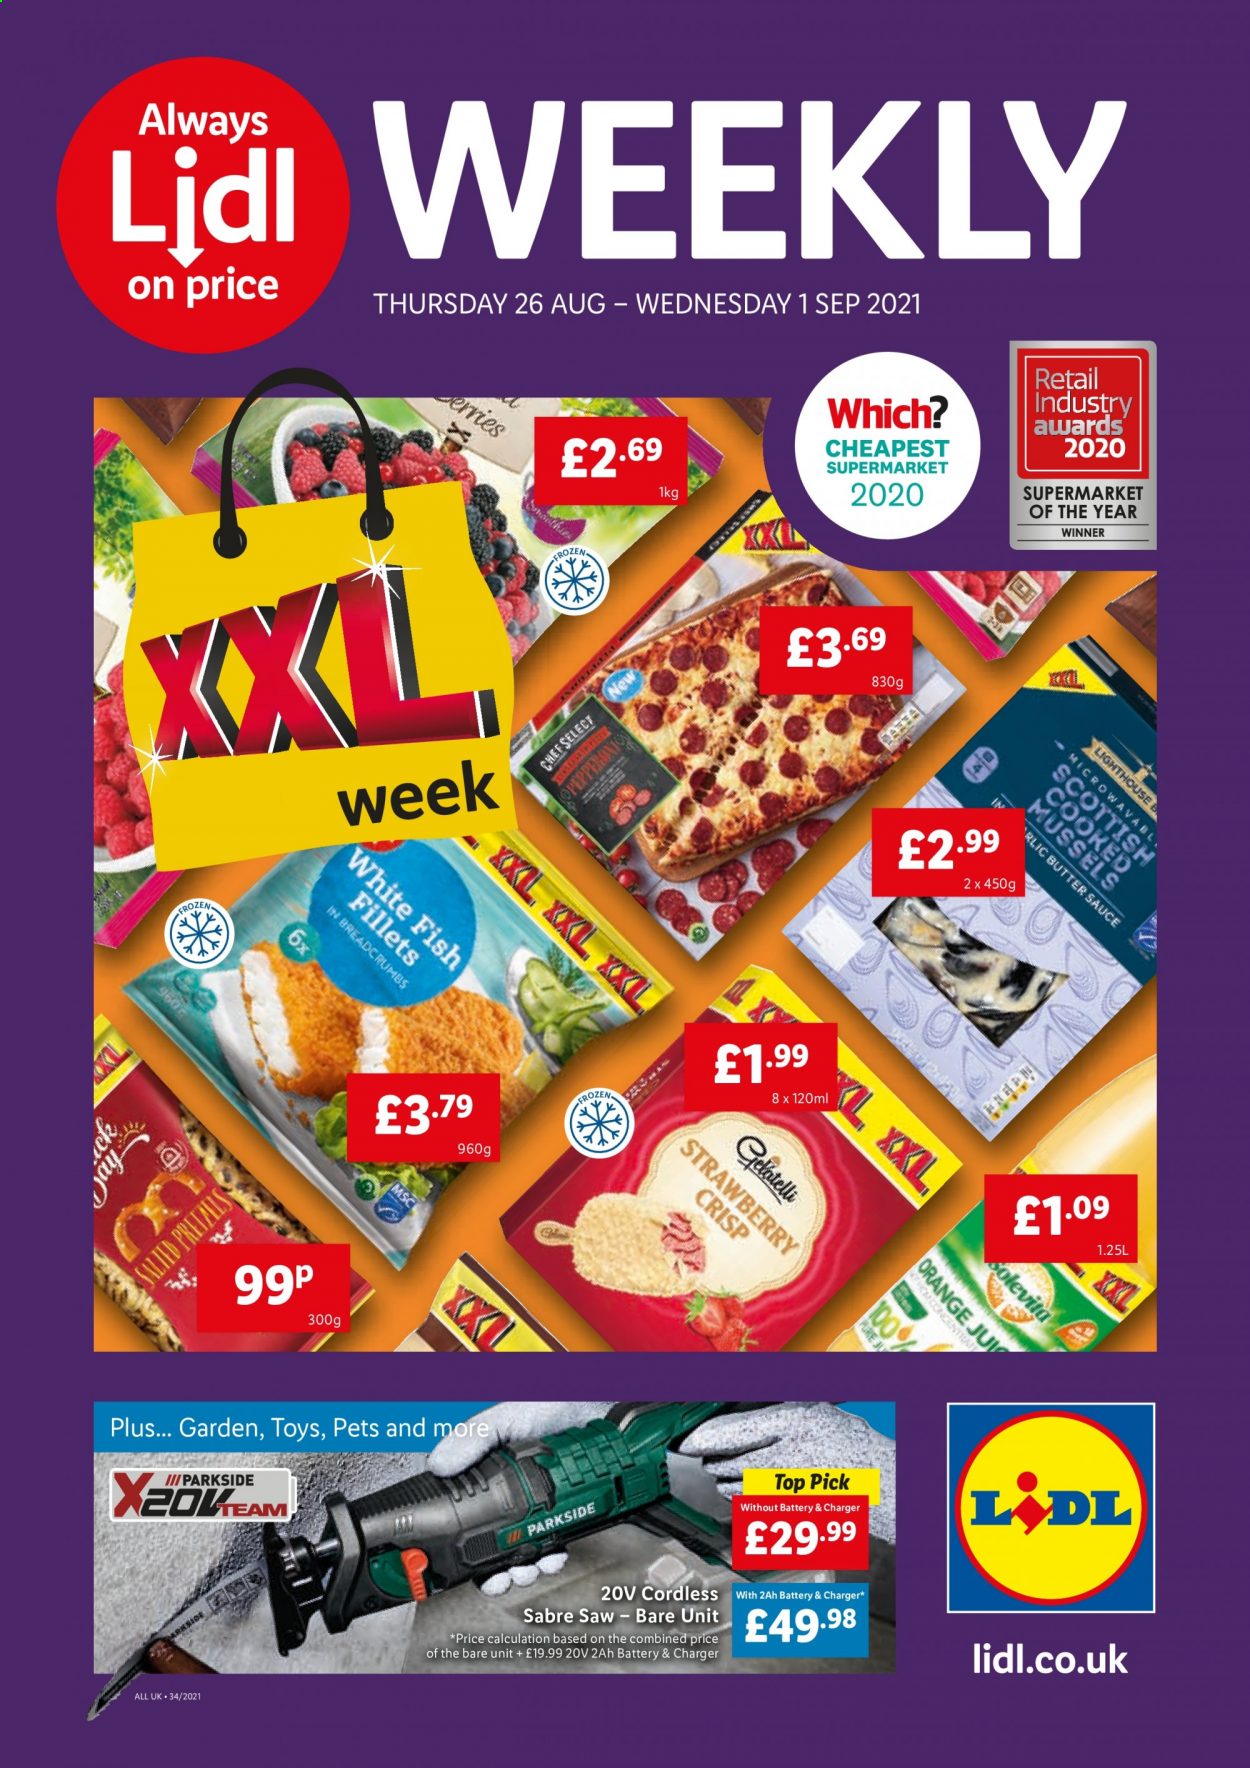 thumbnail - Lidl offer  - 26/08/2021 - 01/09/2021 - Sales products - oranges, pretzels, mussels, whitefish, fish, sauce, butter, battery, toys, Parkside, saw. Page 1.